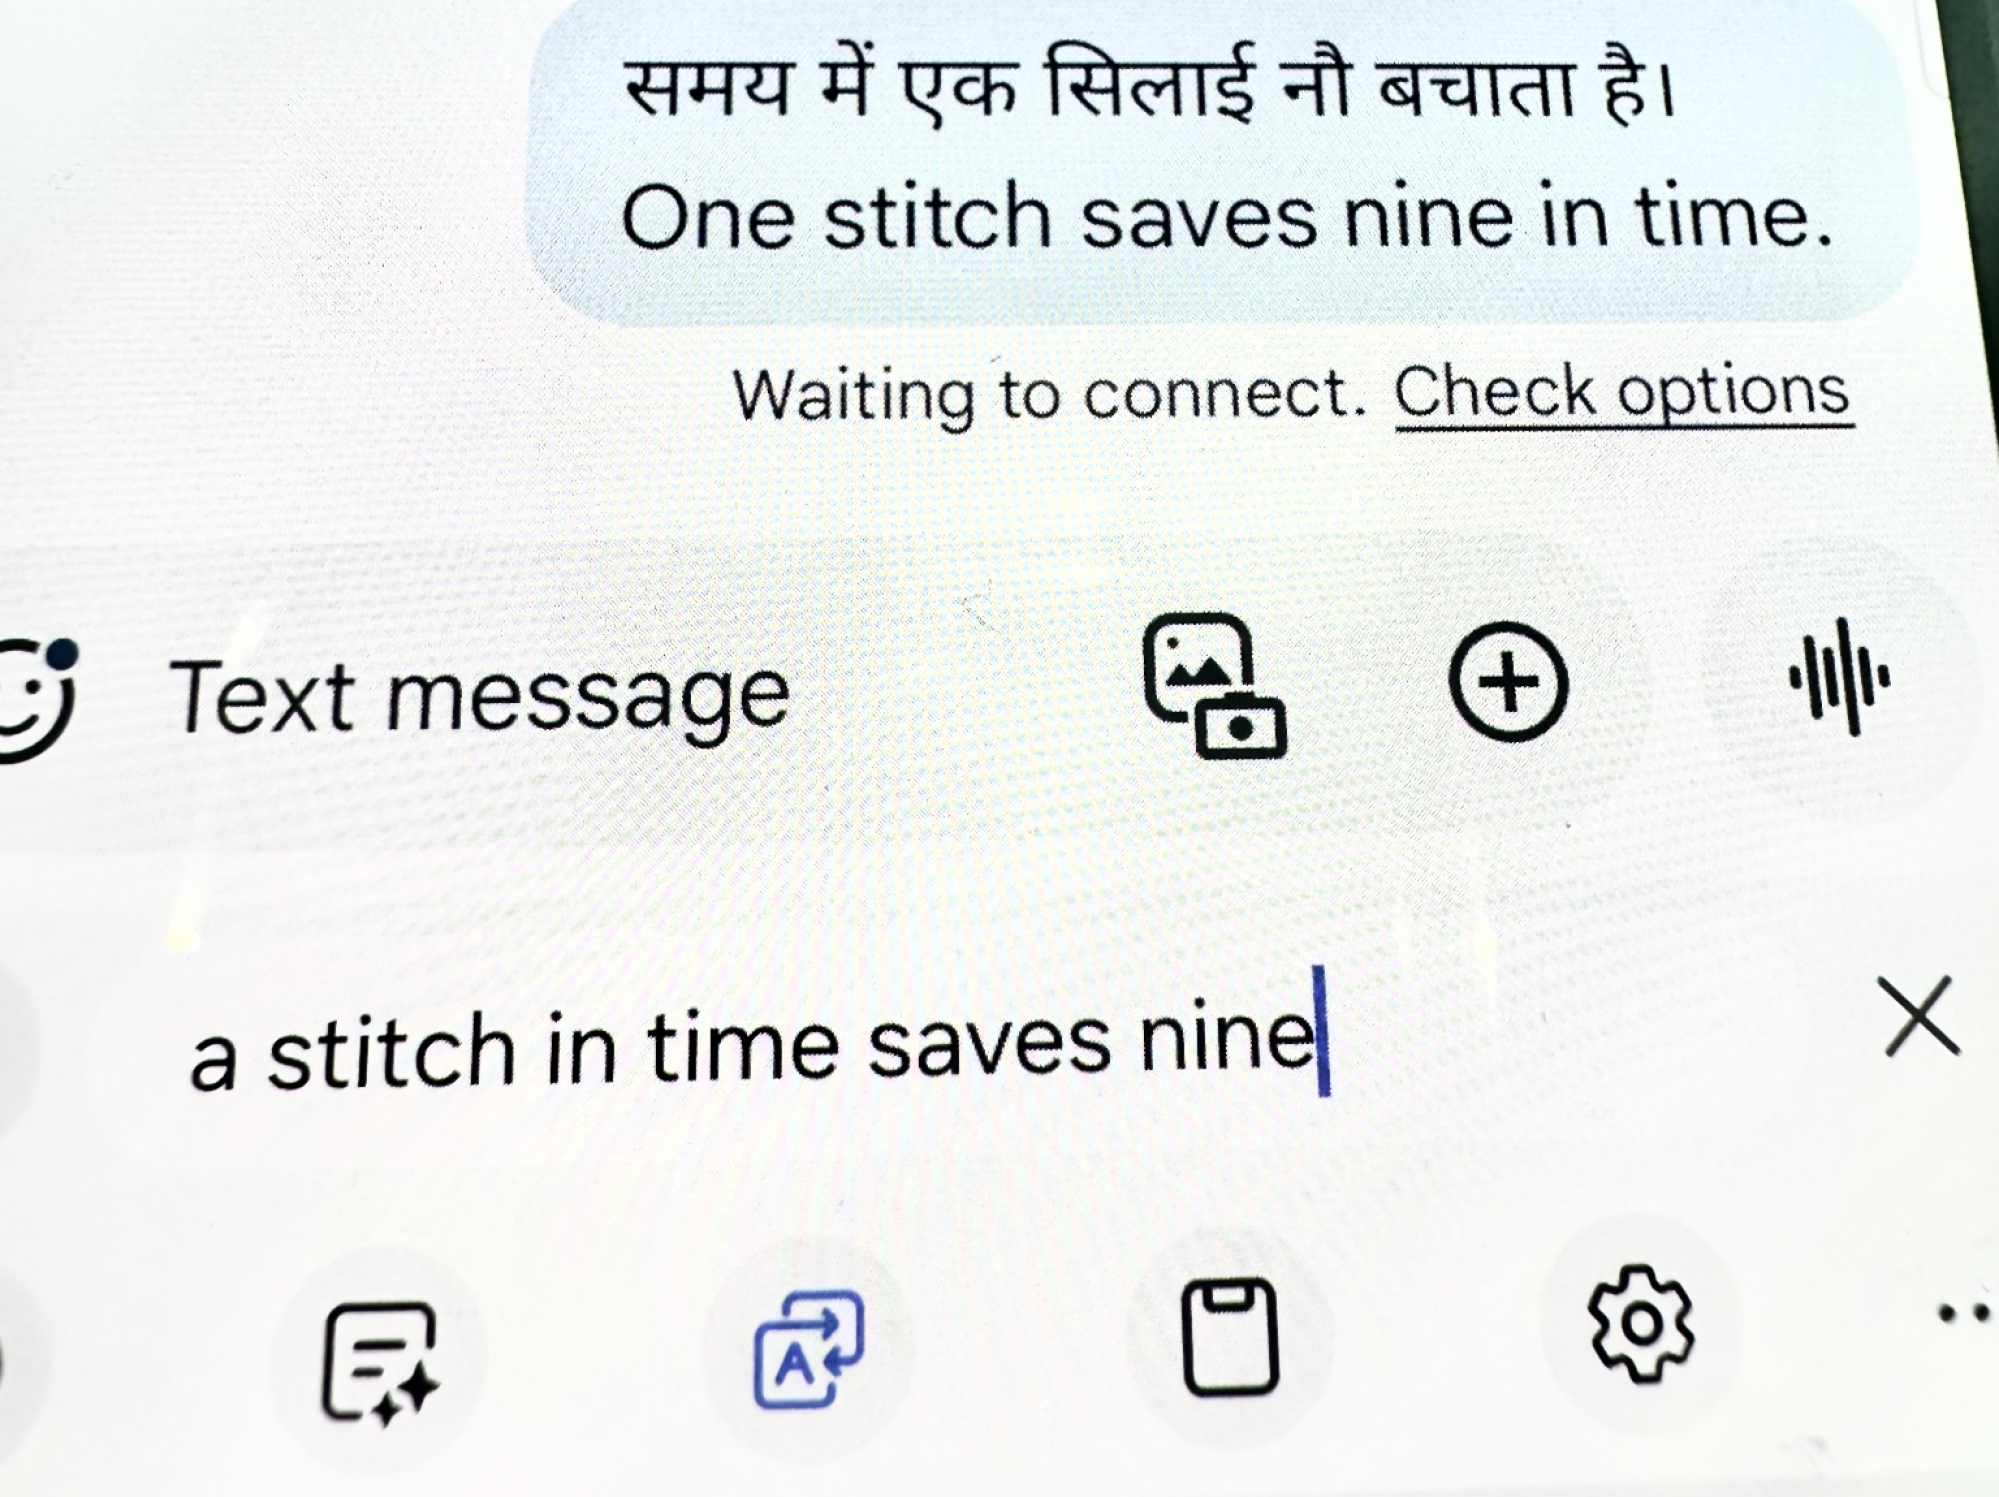 The phrase "a stitch in time saves nine" is translated into Hindi on a phone screen.